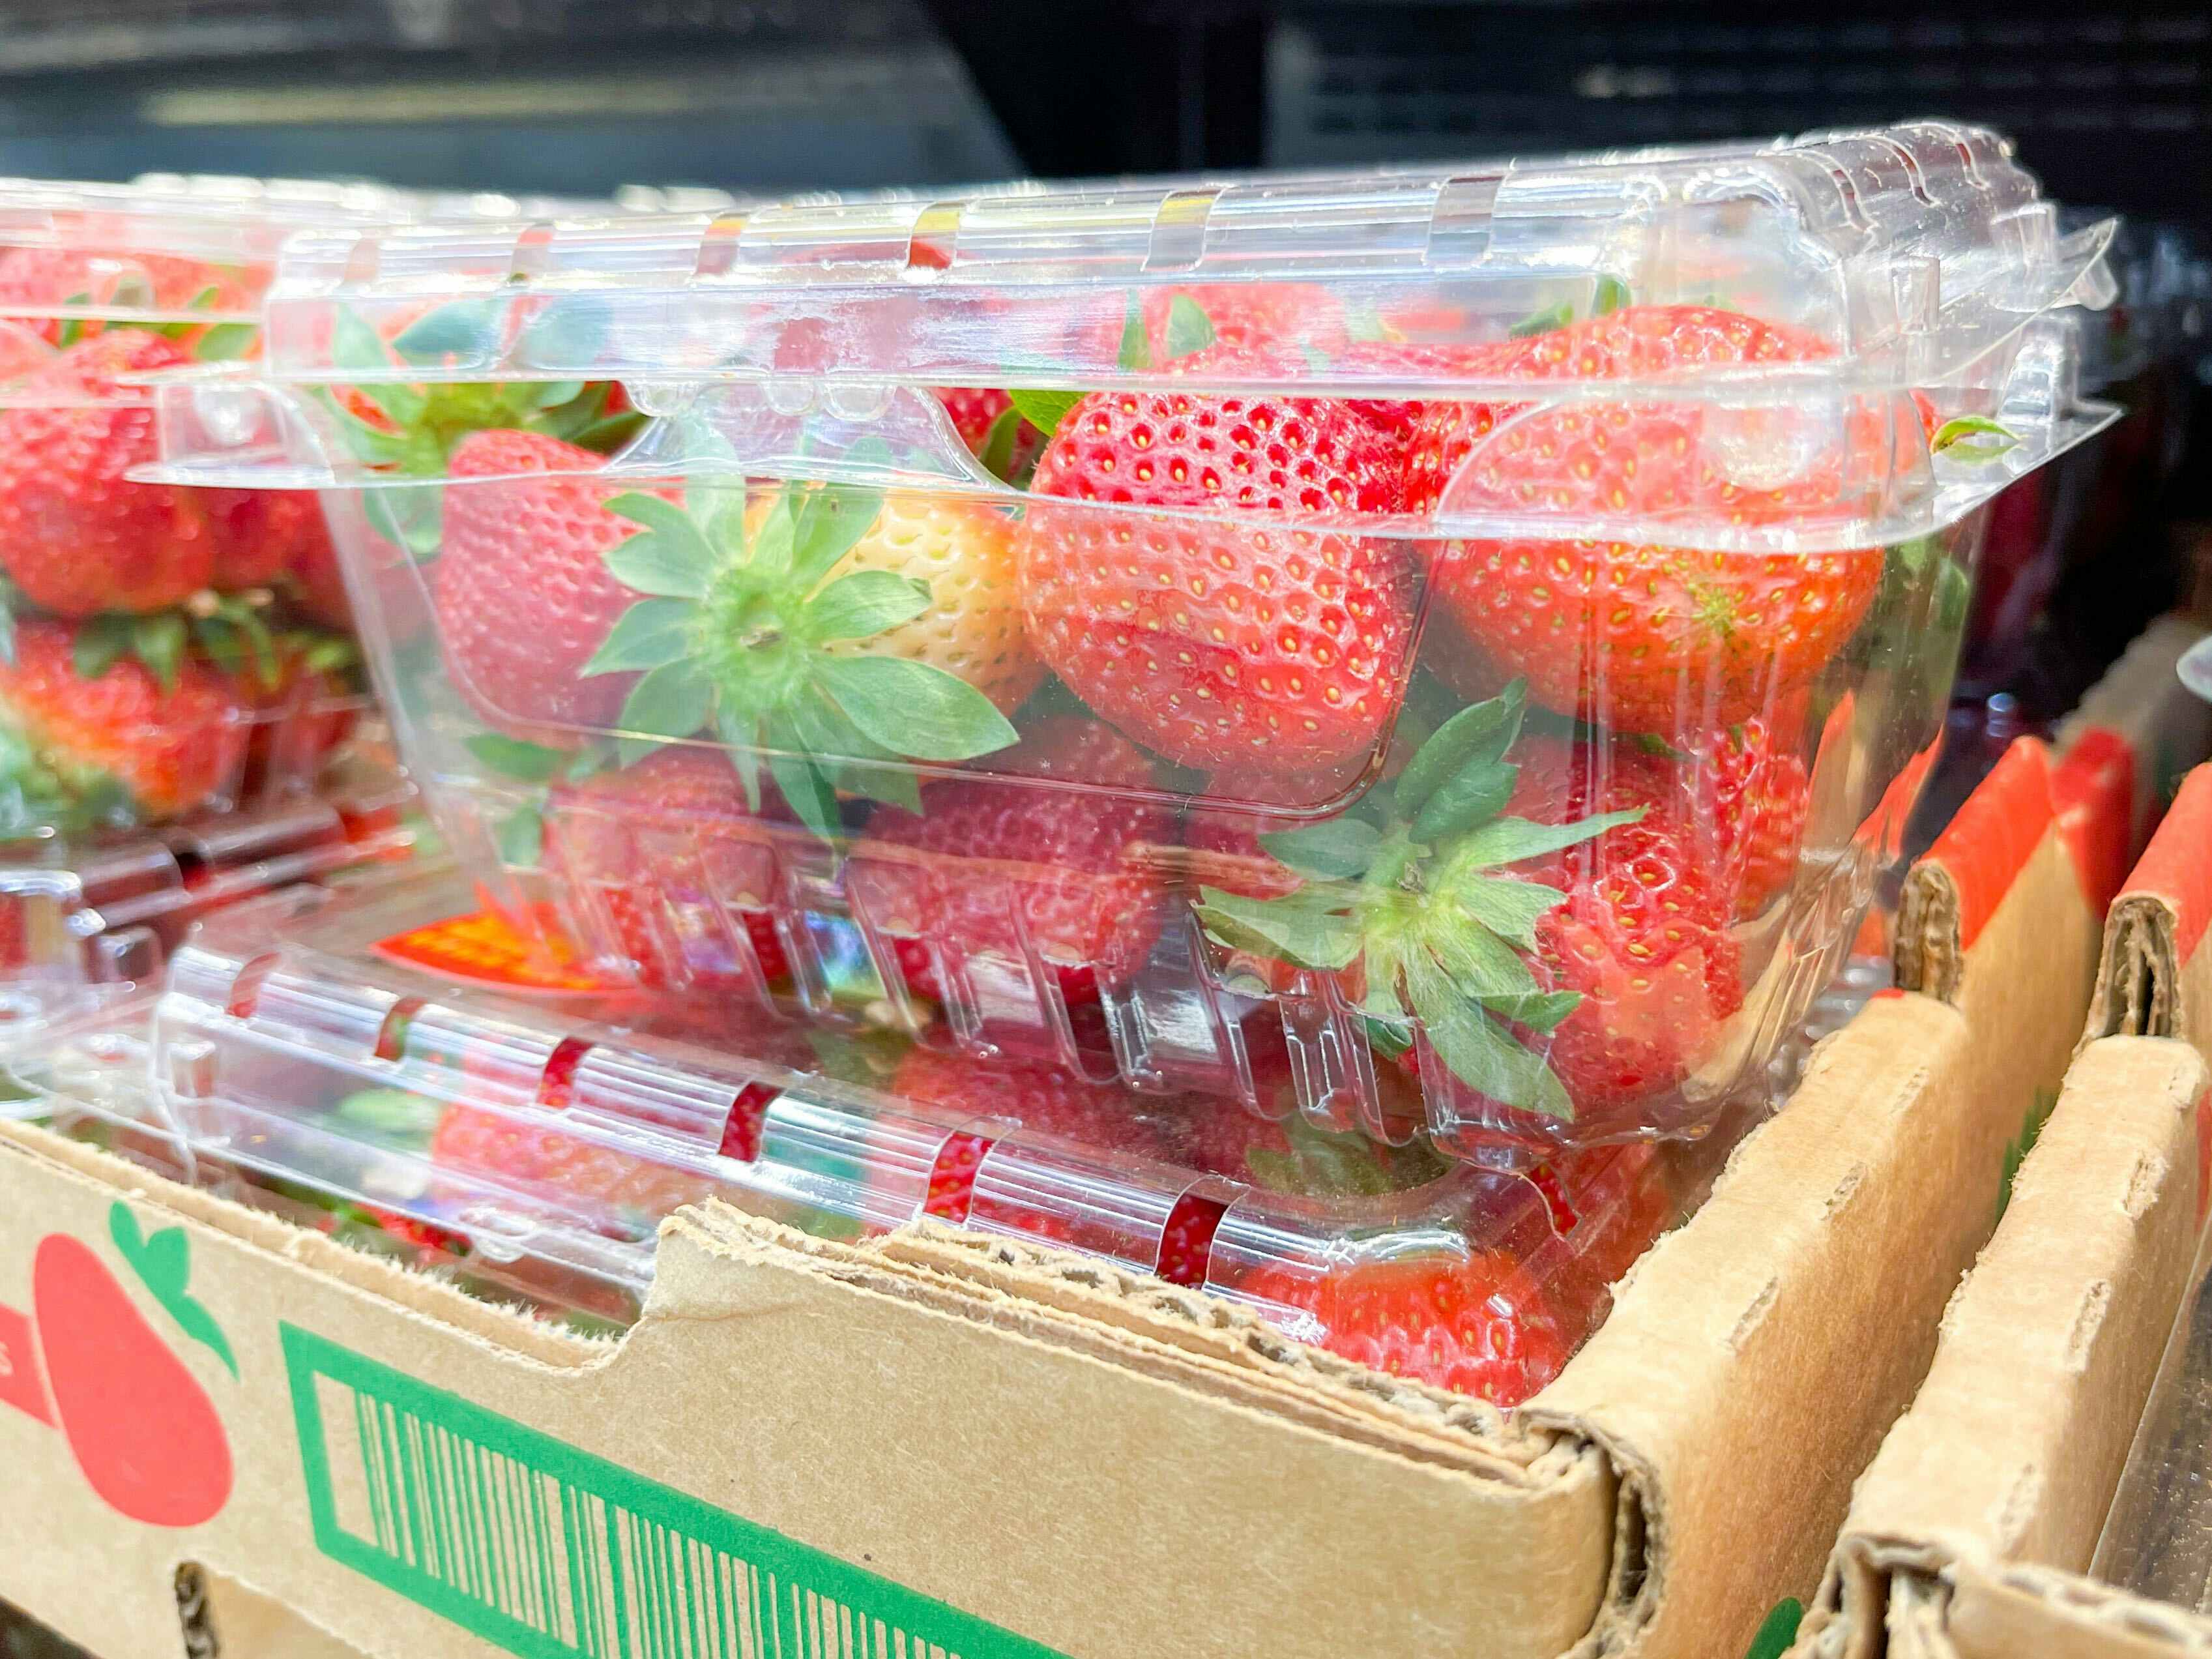 A box of strawberries sitting atop another box of strawberries.